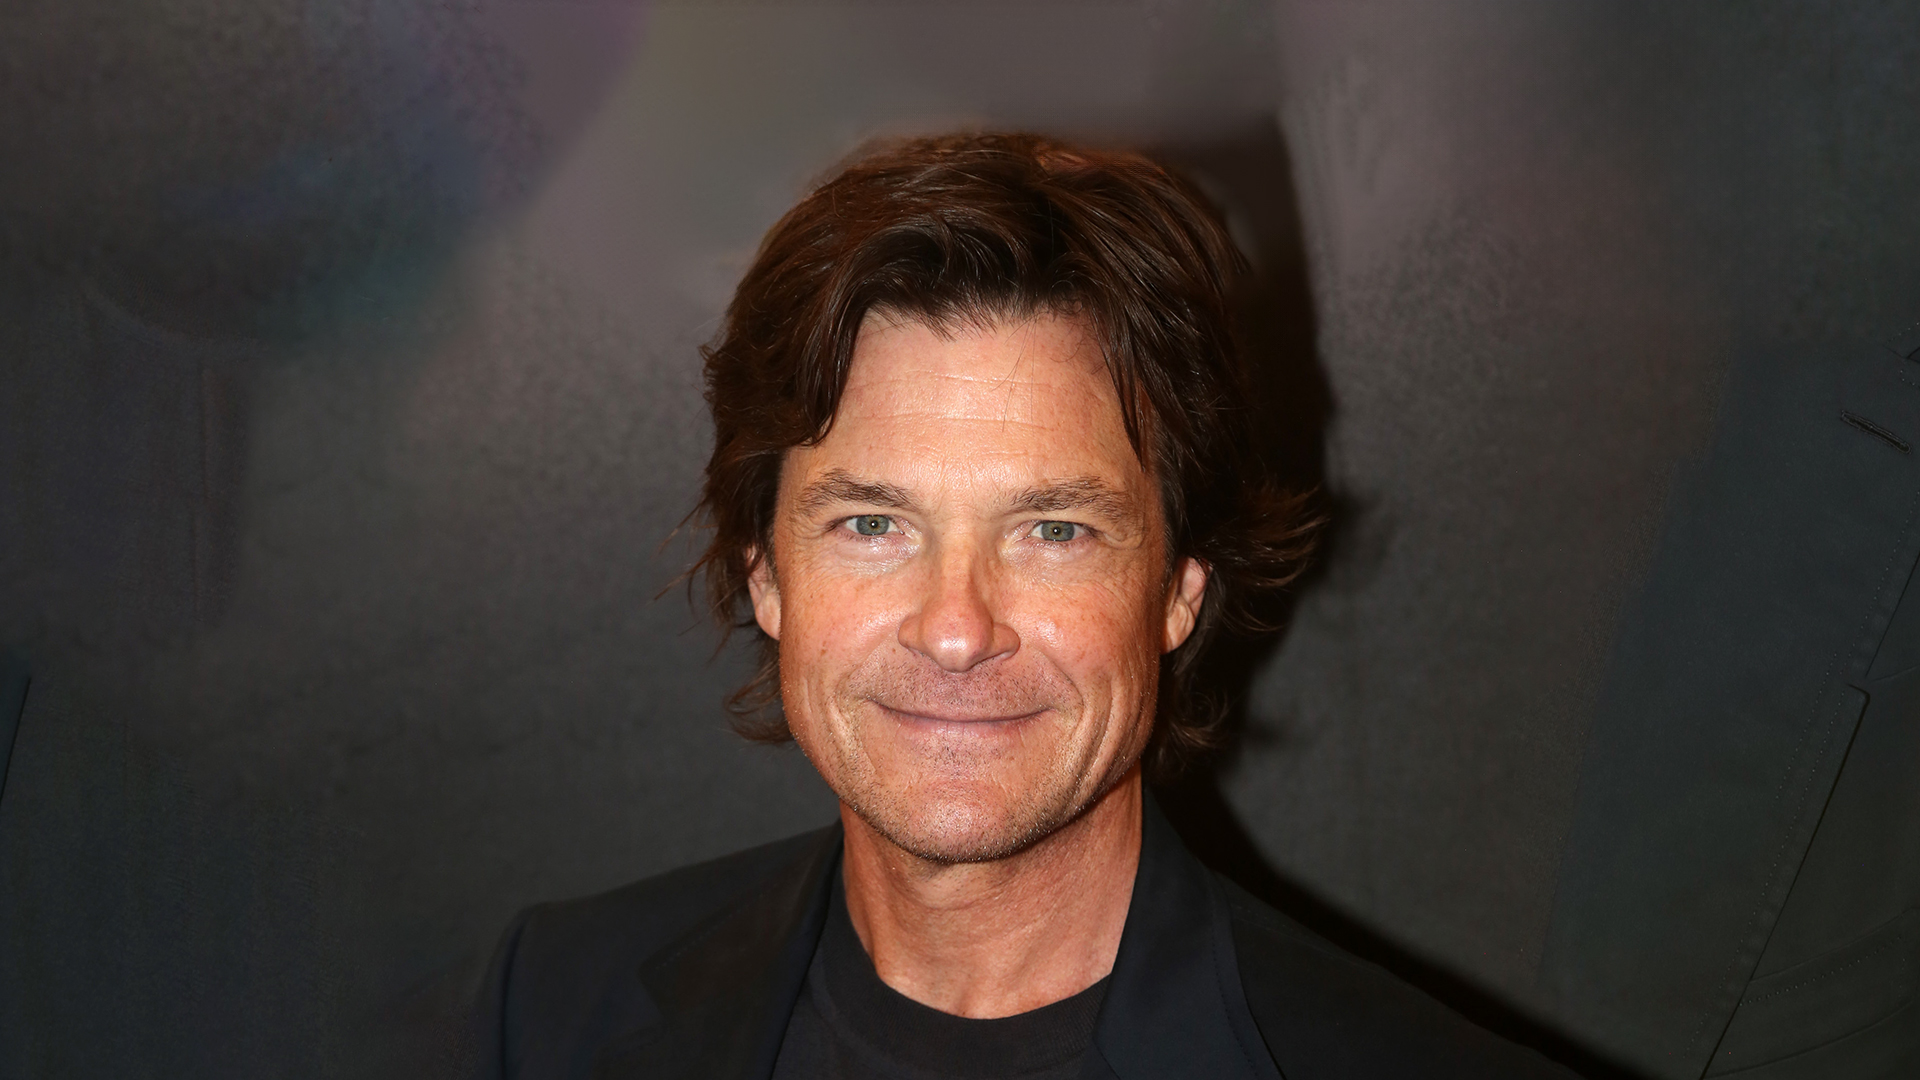 Transformed: Jason Bateman Shocks Fans with Long Hair, Sparking Jesus or Little House on the Prairie Speculations